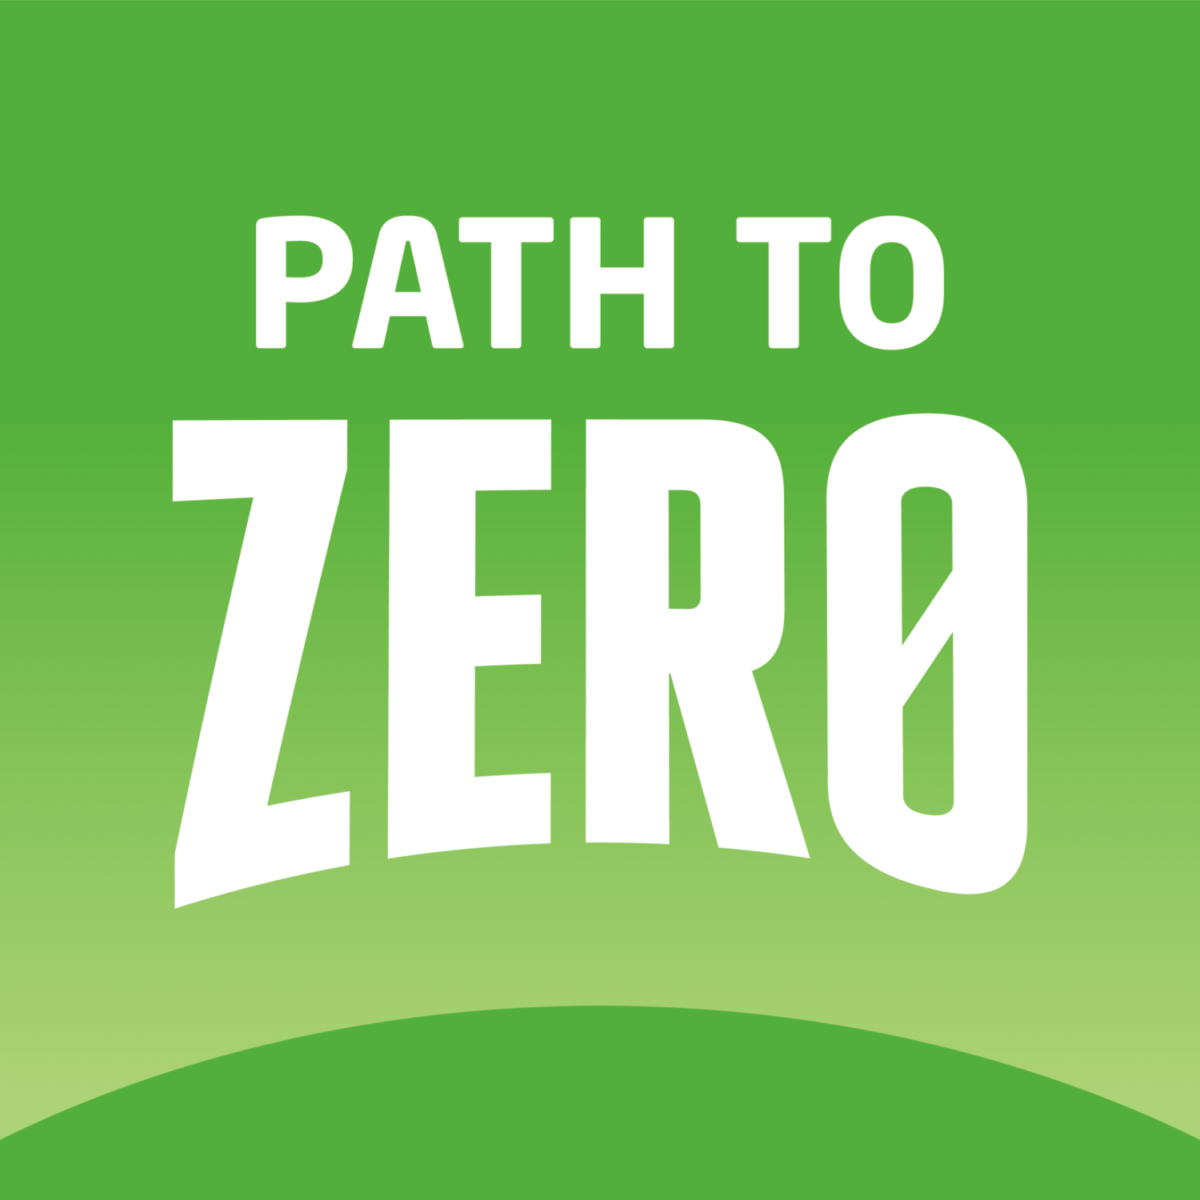 POWERS Program Manager Ian Gansler Joins the Path to Zero Podcast